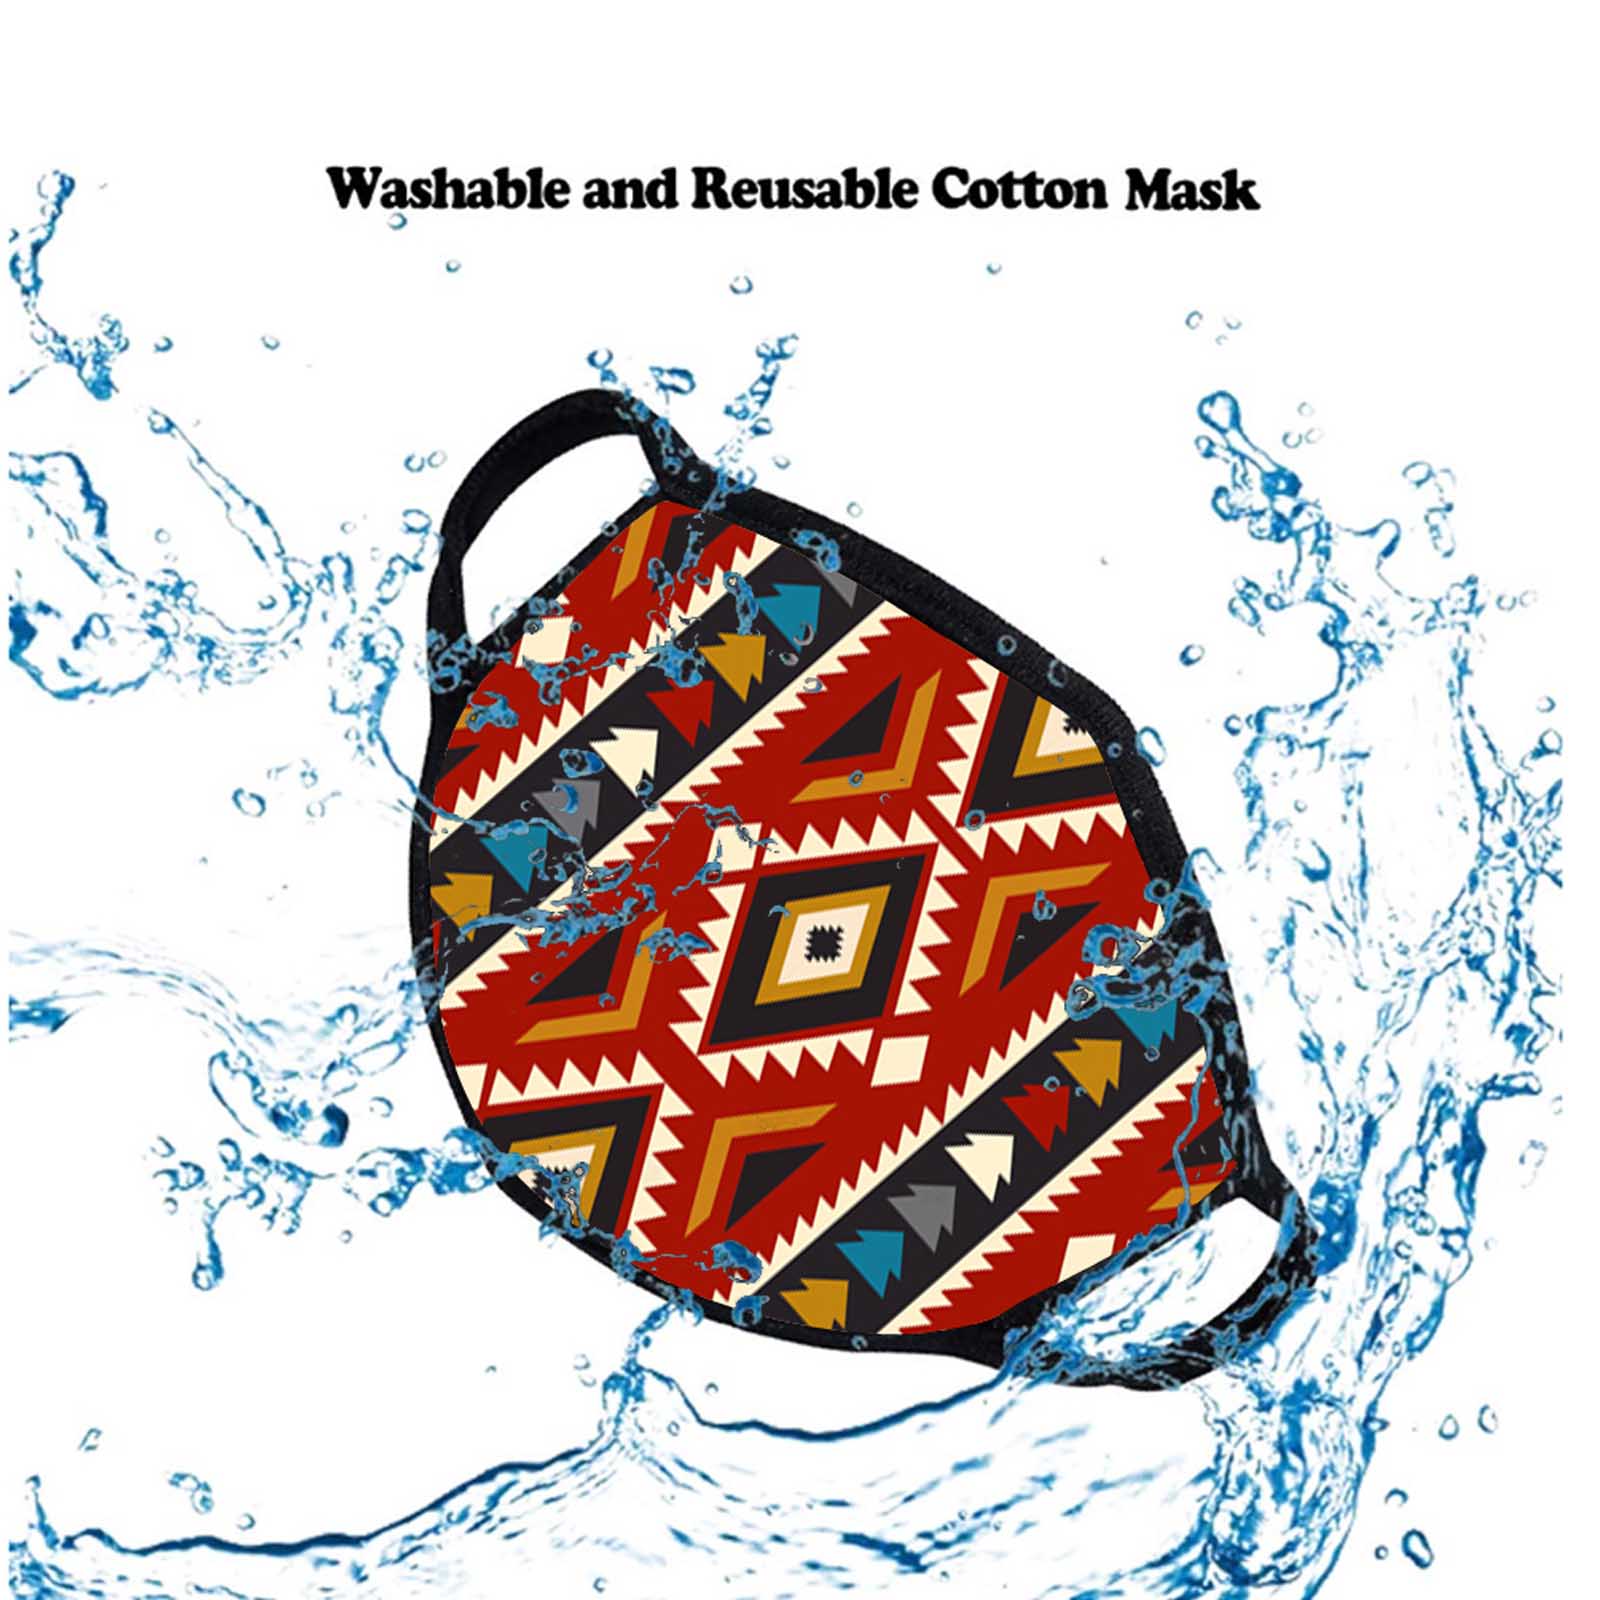 SFCM-008 Red Aztec Print Fabric Face Mask Double Layer 1Pcs